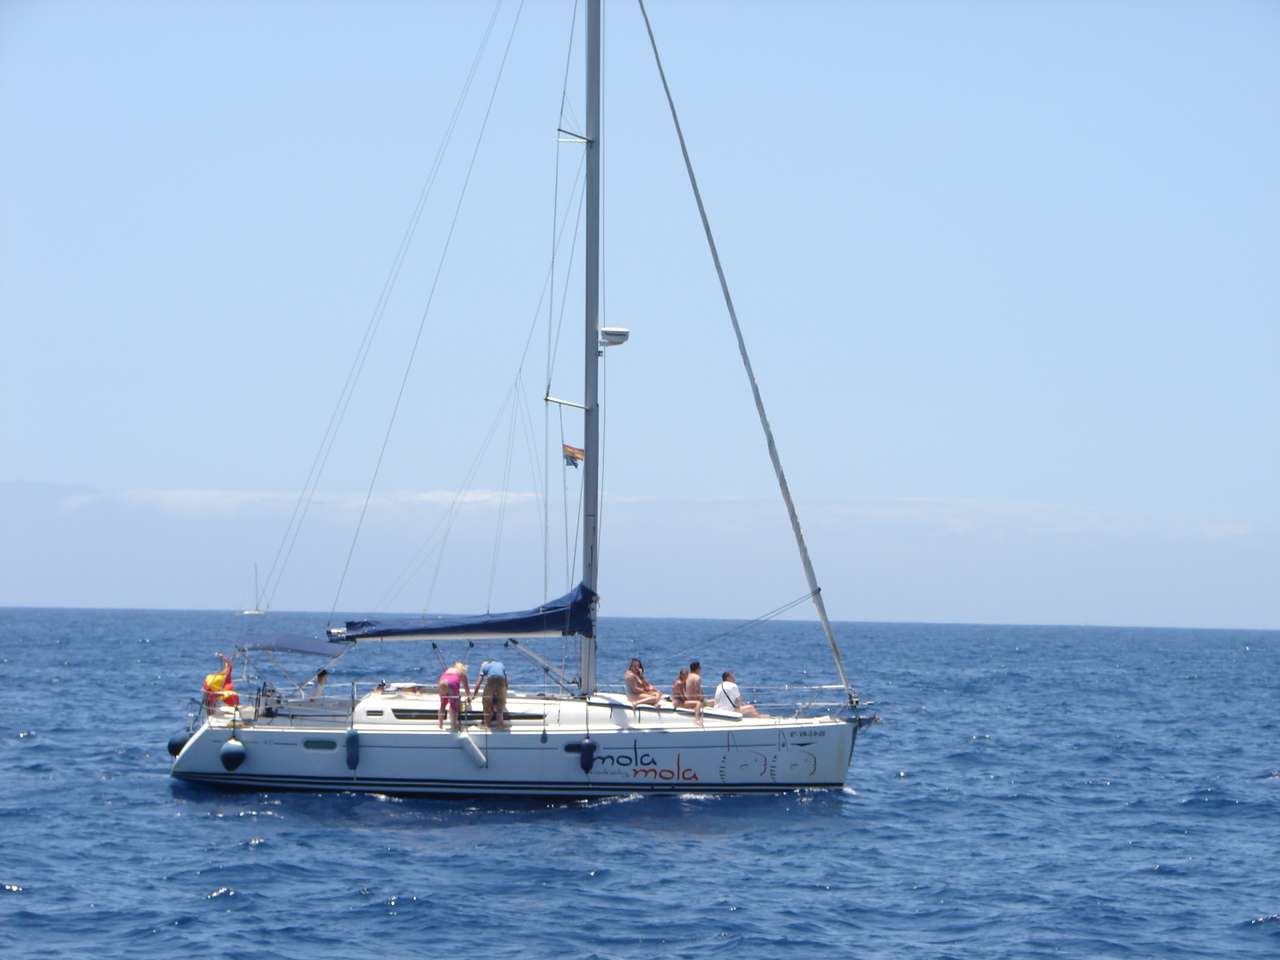 Yacht on the water near Tenerife online puzzle